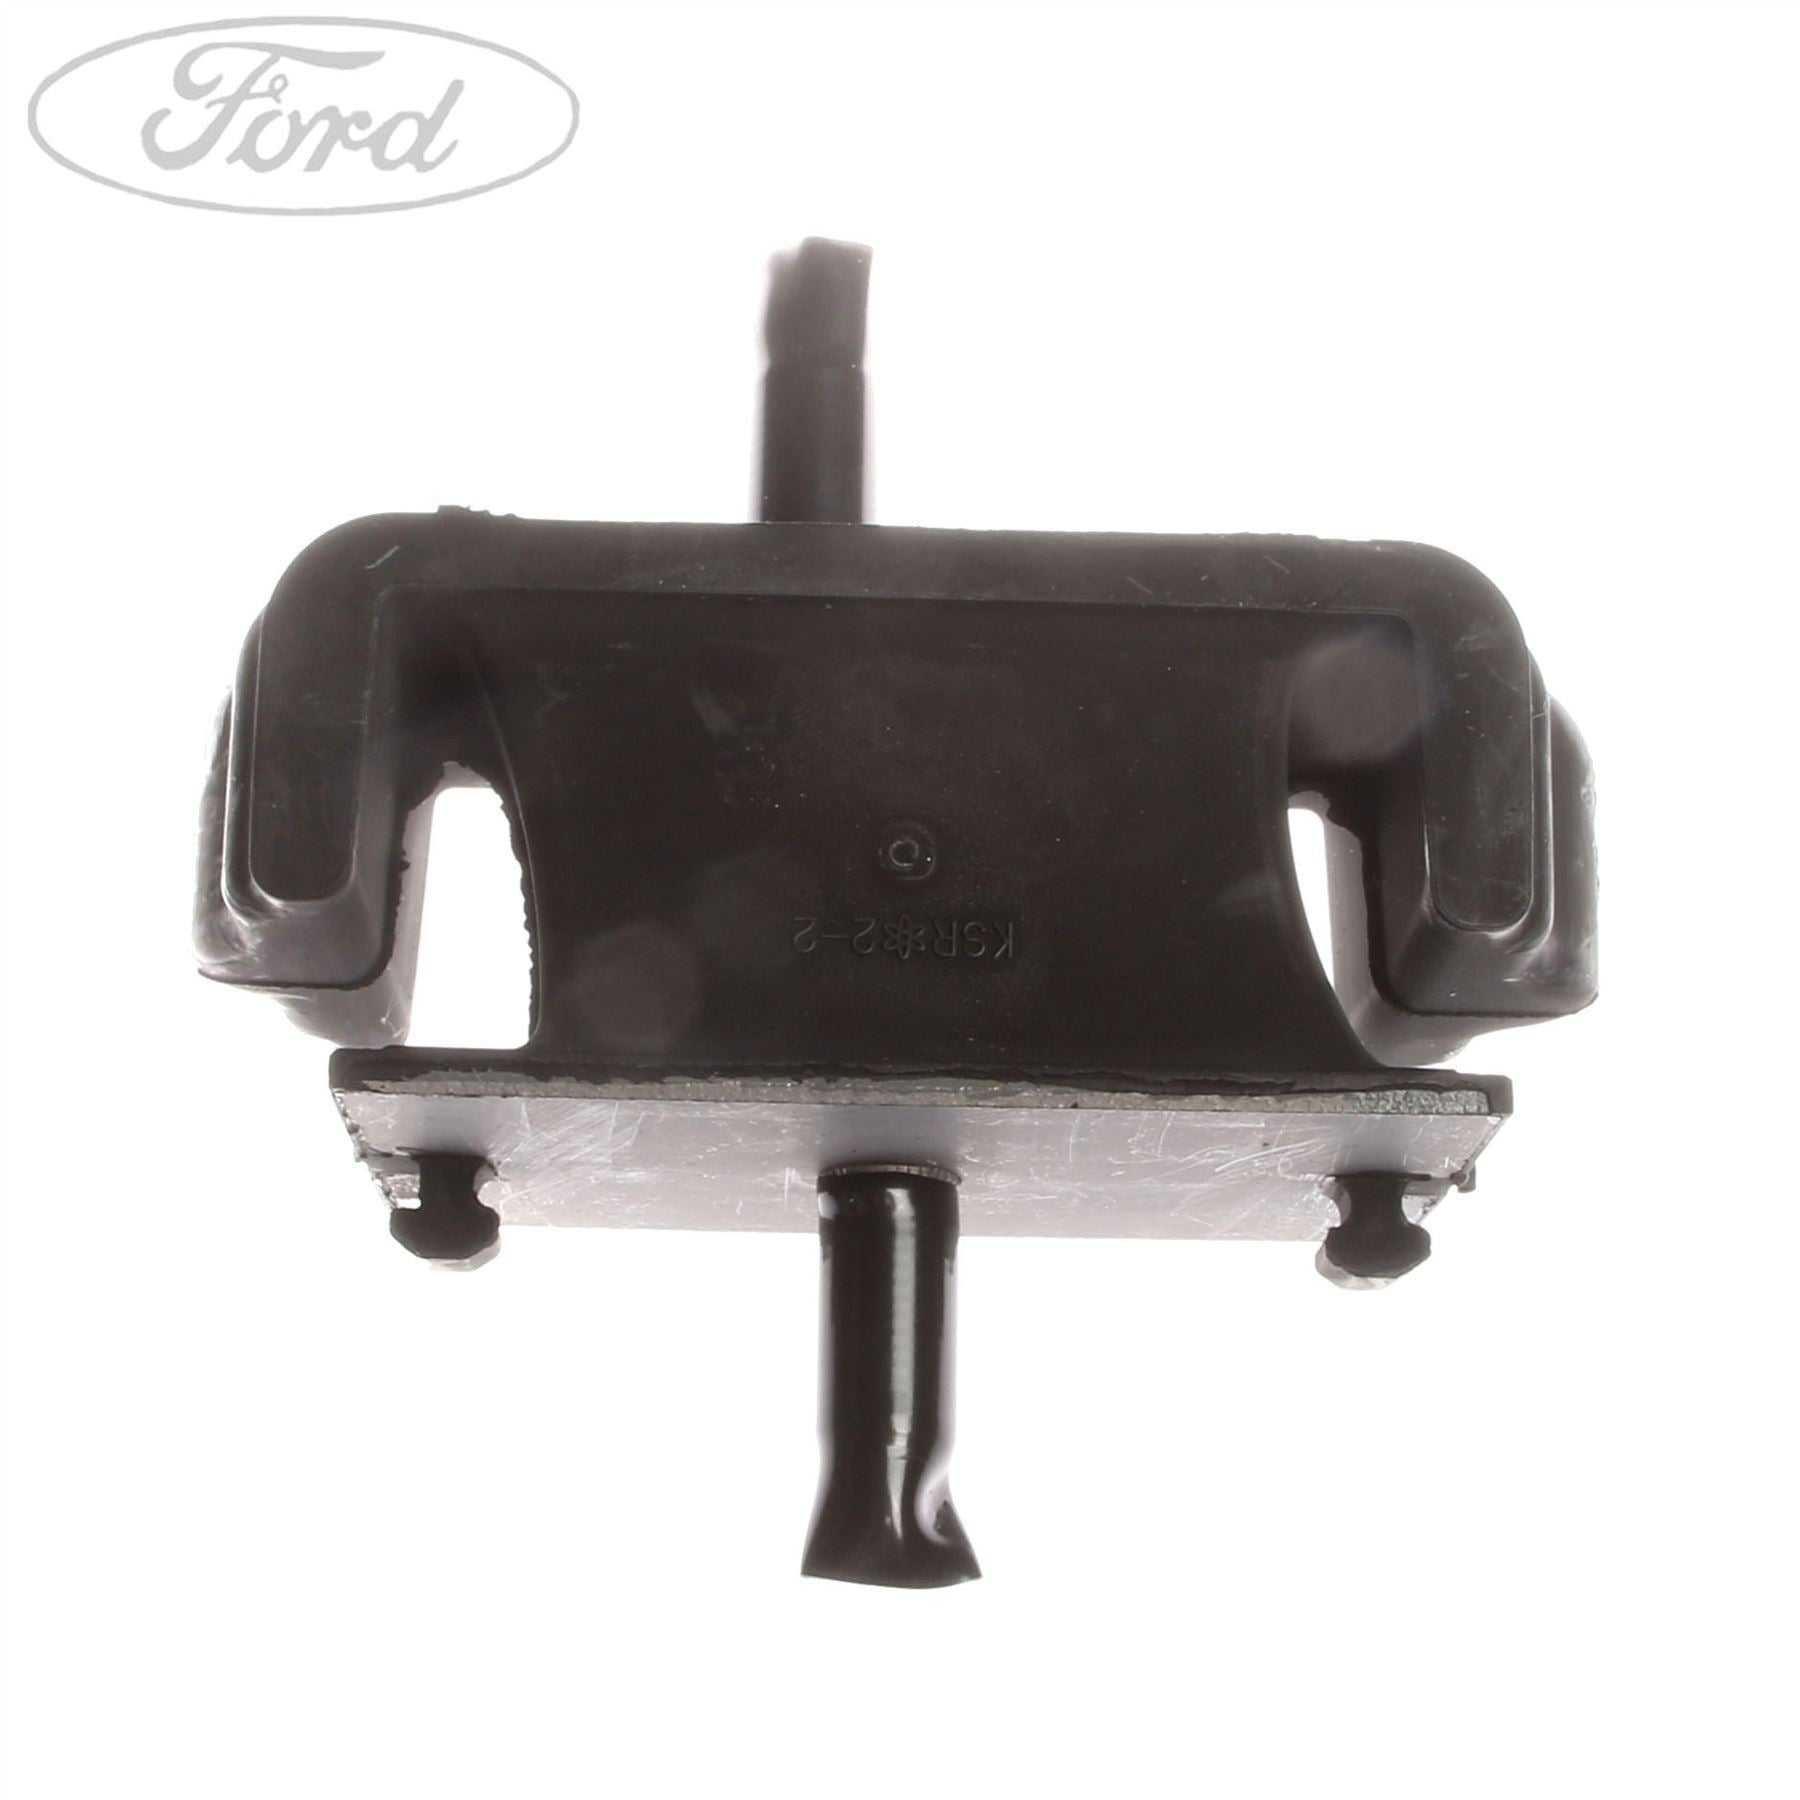 Ford, UNDERBODY PARTS 4 SPEED AUTOMATIC TRANSMISSION